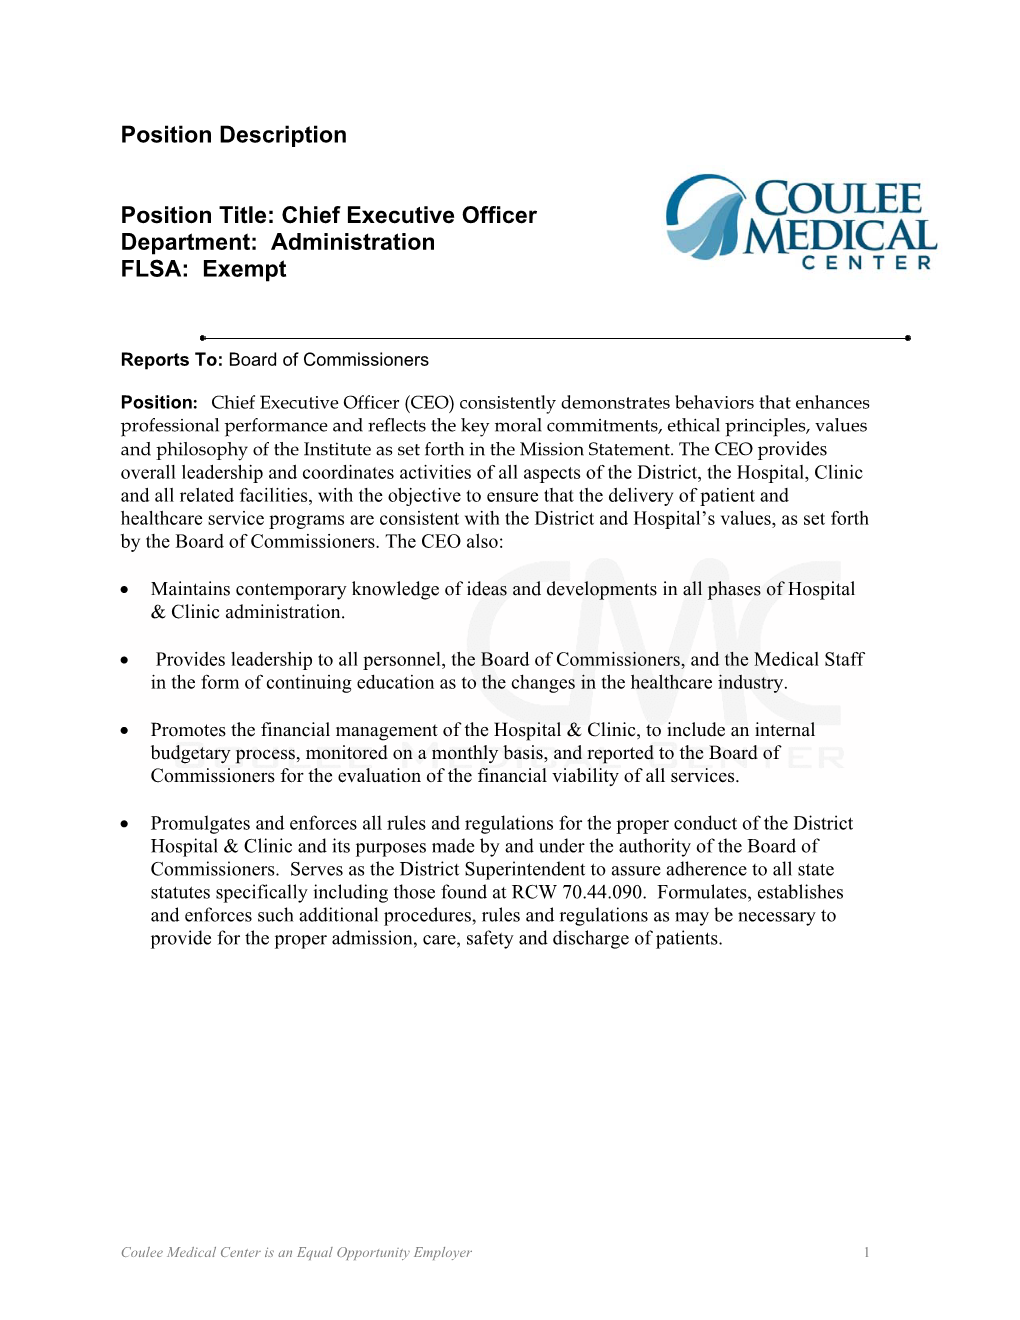 Chief Executive Officer Department: Administration FLSA: Exempt